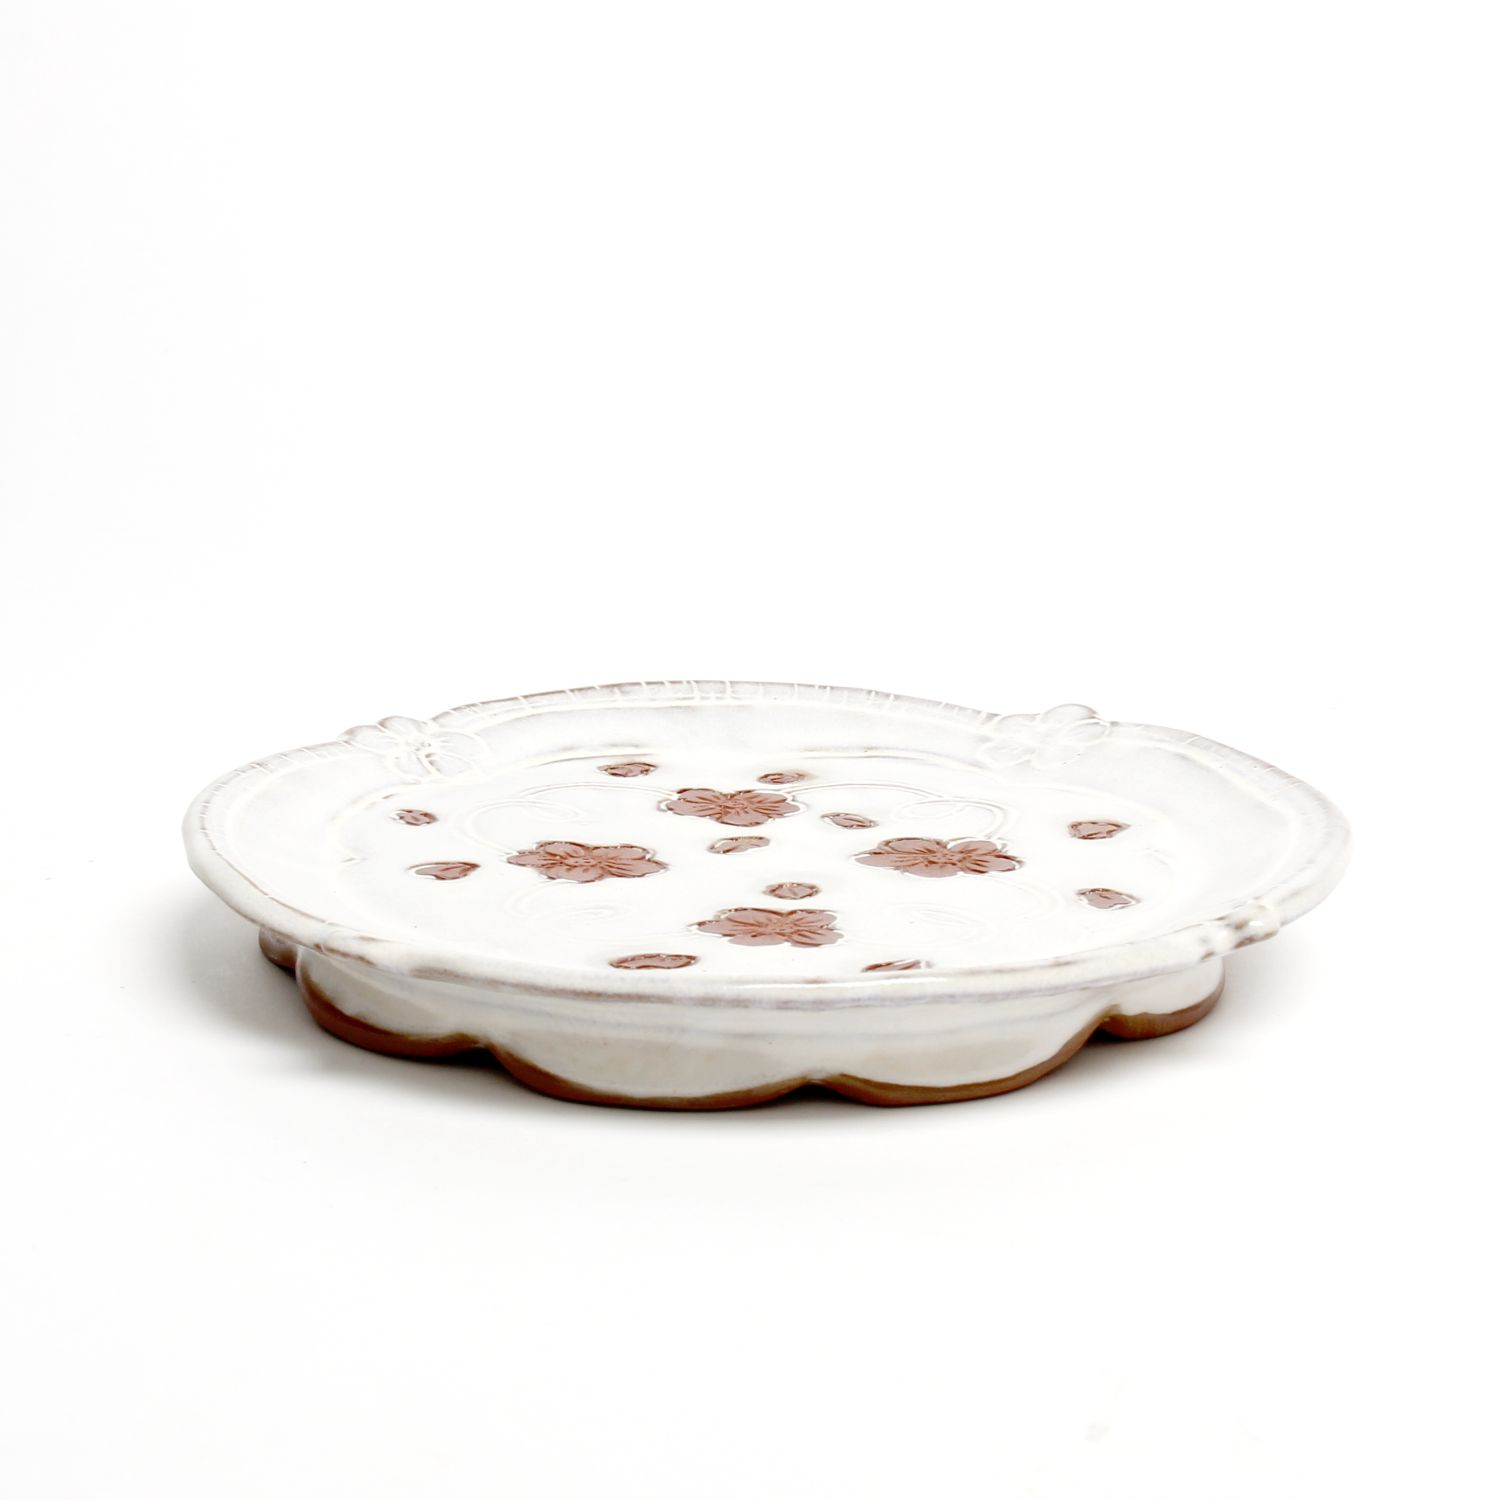 Zoe Pinnell: Small White Floral Plate Product Image 2 of 3